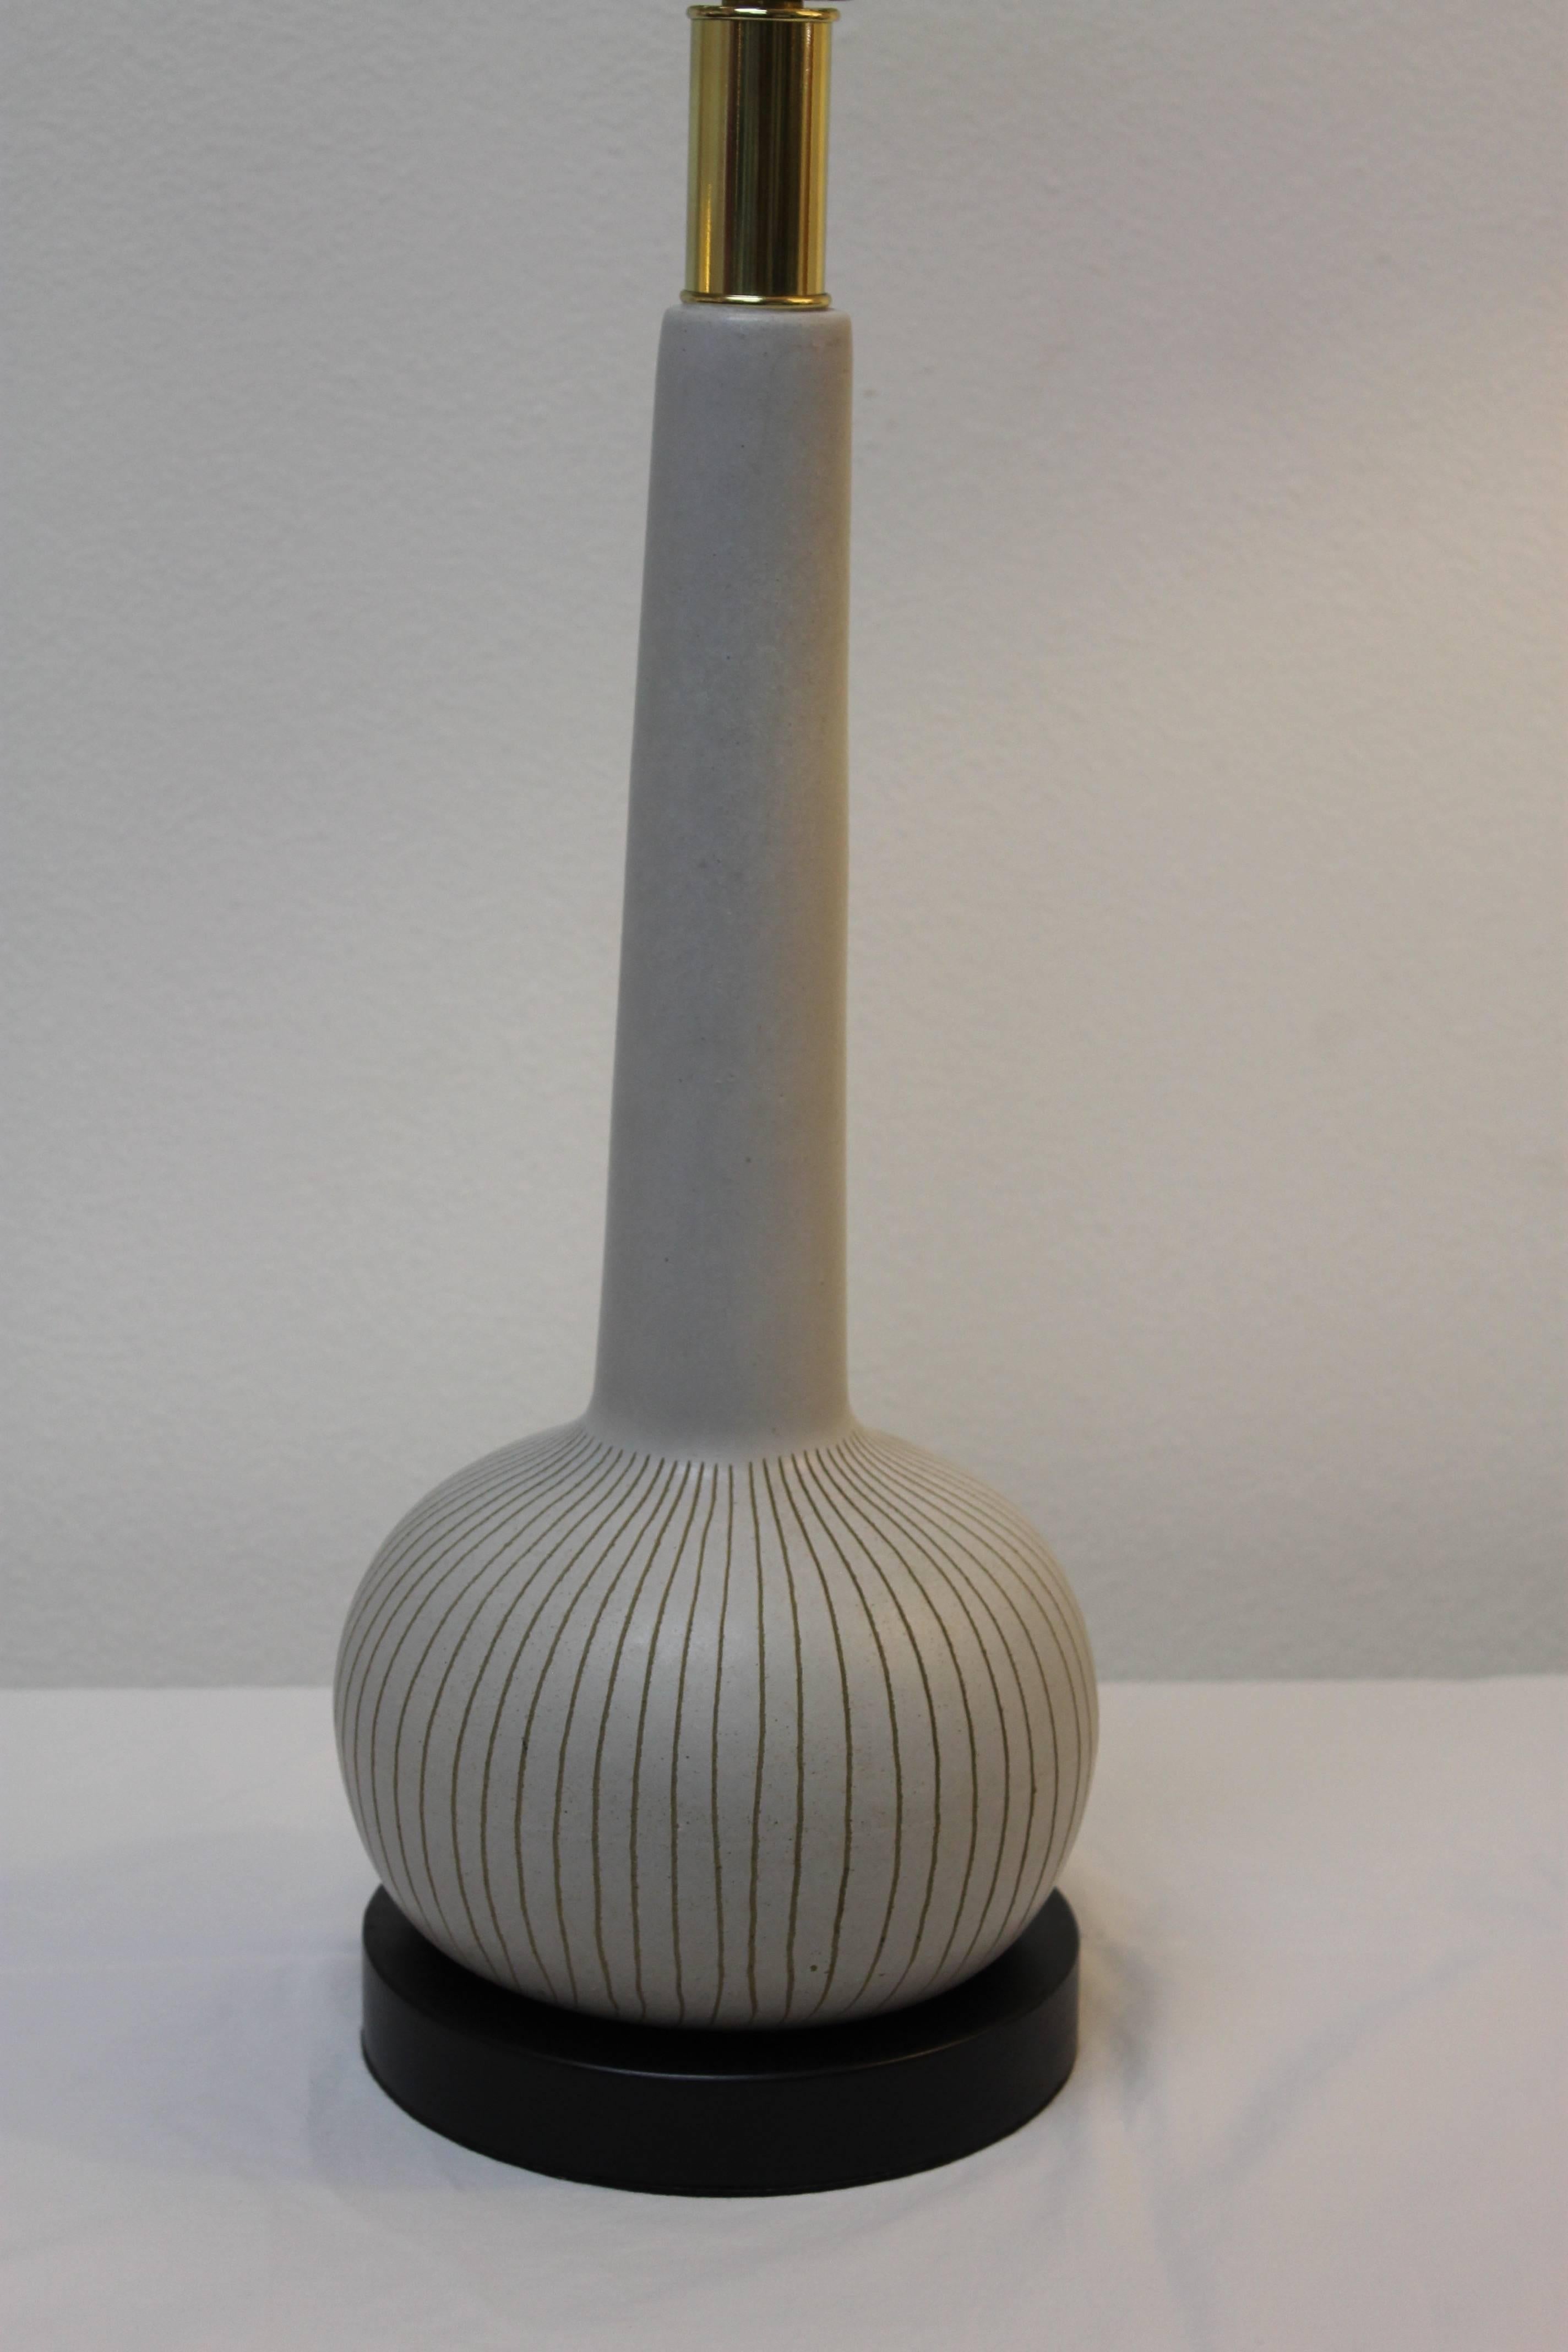 Bulbous Martz lamp newly updated. We added a new black wood base, brass neck and newly rewired. Measure: Ceramic portion is 15.5" high and 75" diameter. Wood base is 7" diameter. Total height from base to the bottom of socket is